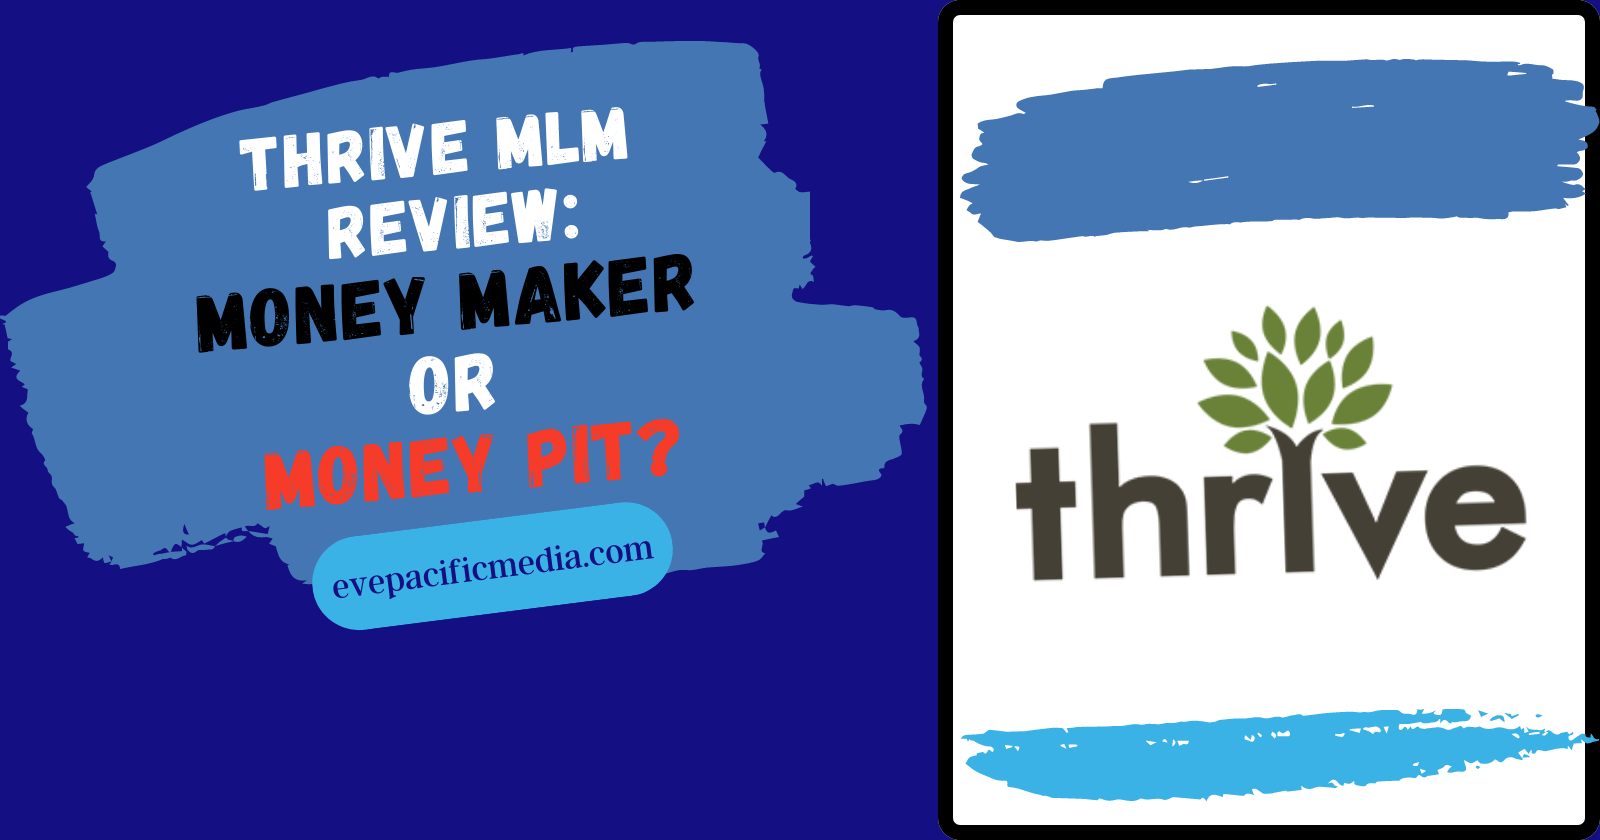 Thrive MLM Review: Money Maker or Money Pit?